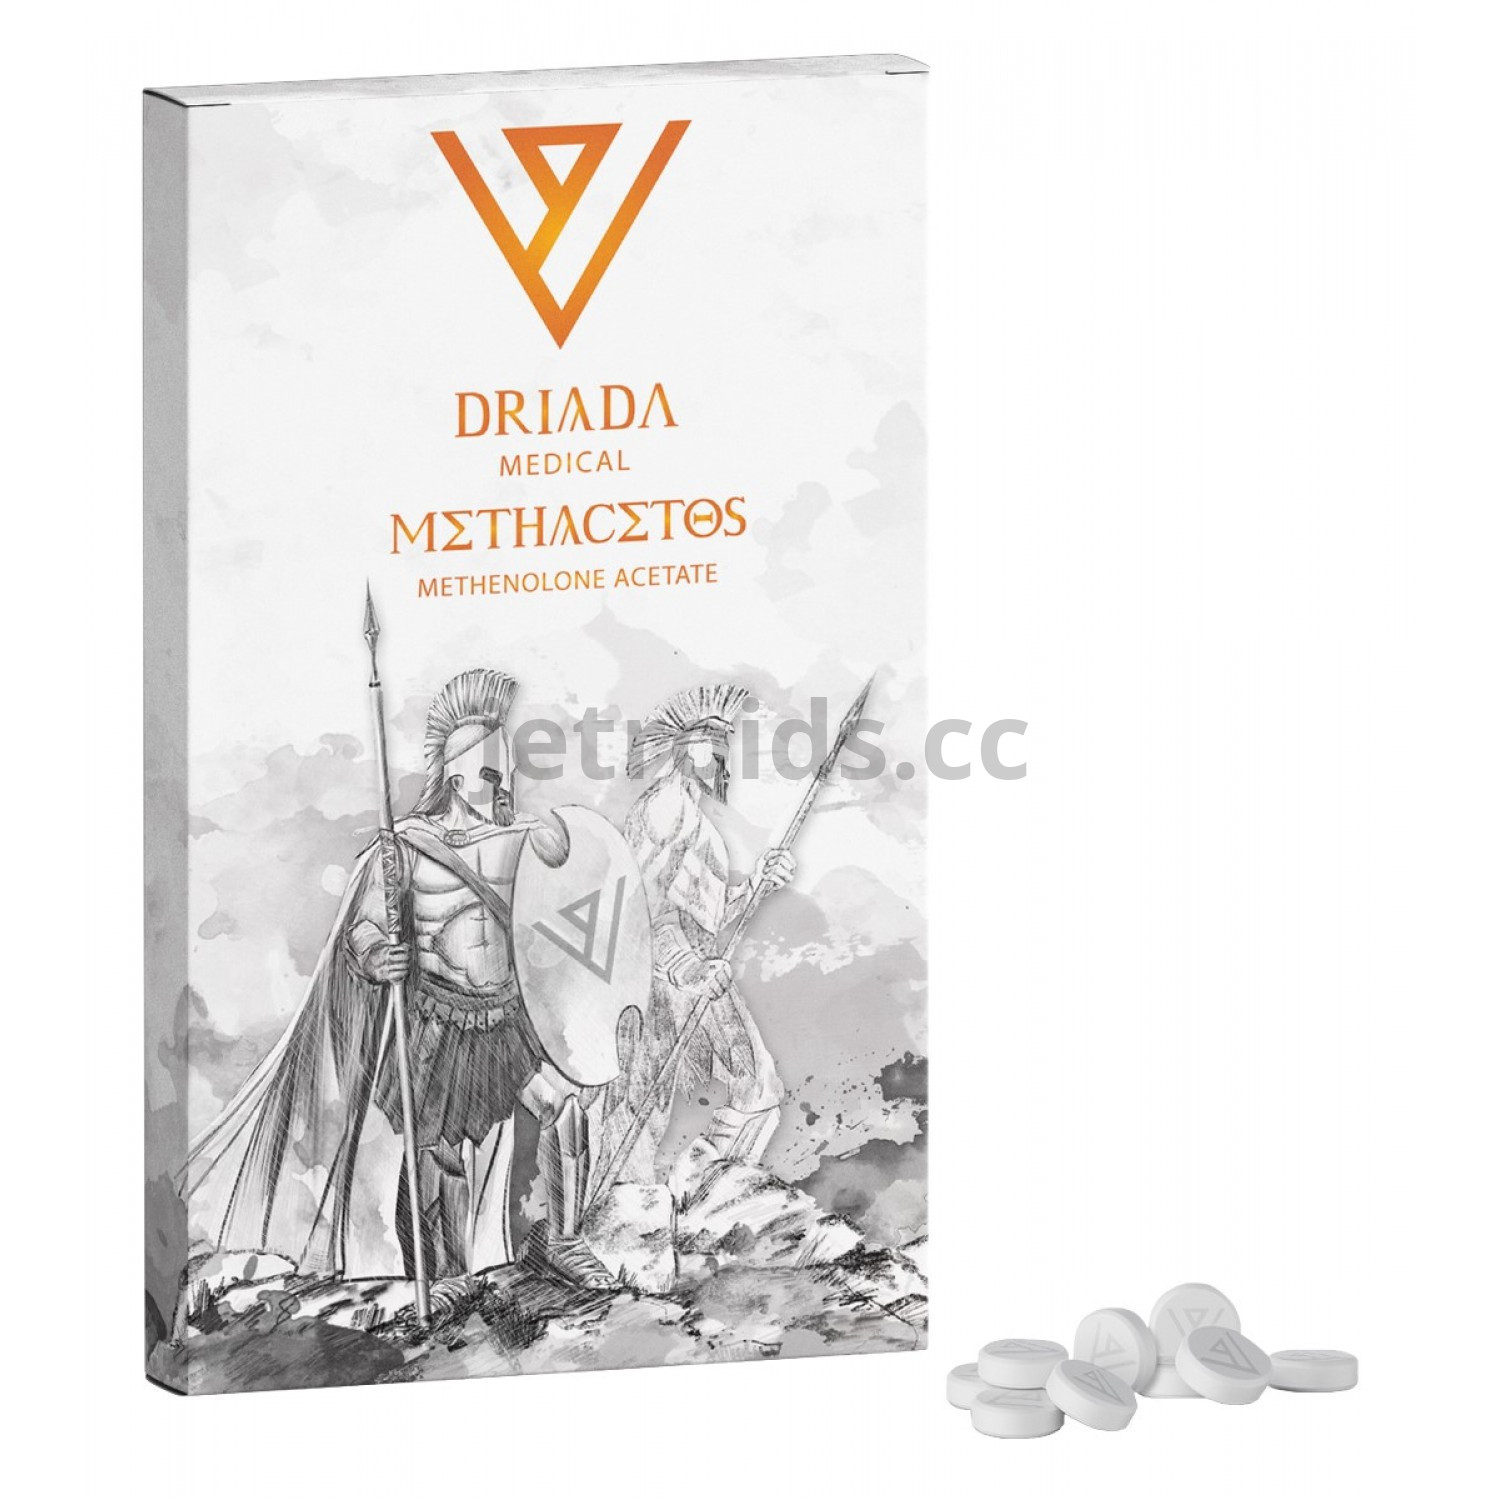 Driada Medical Methacetos 25 mg Product Info